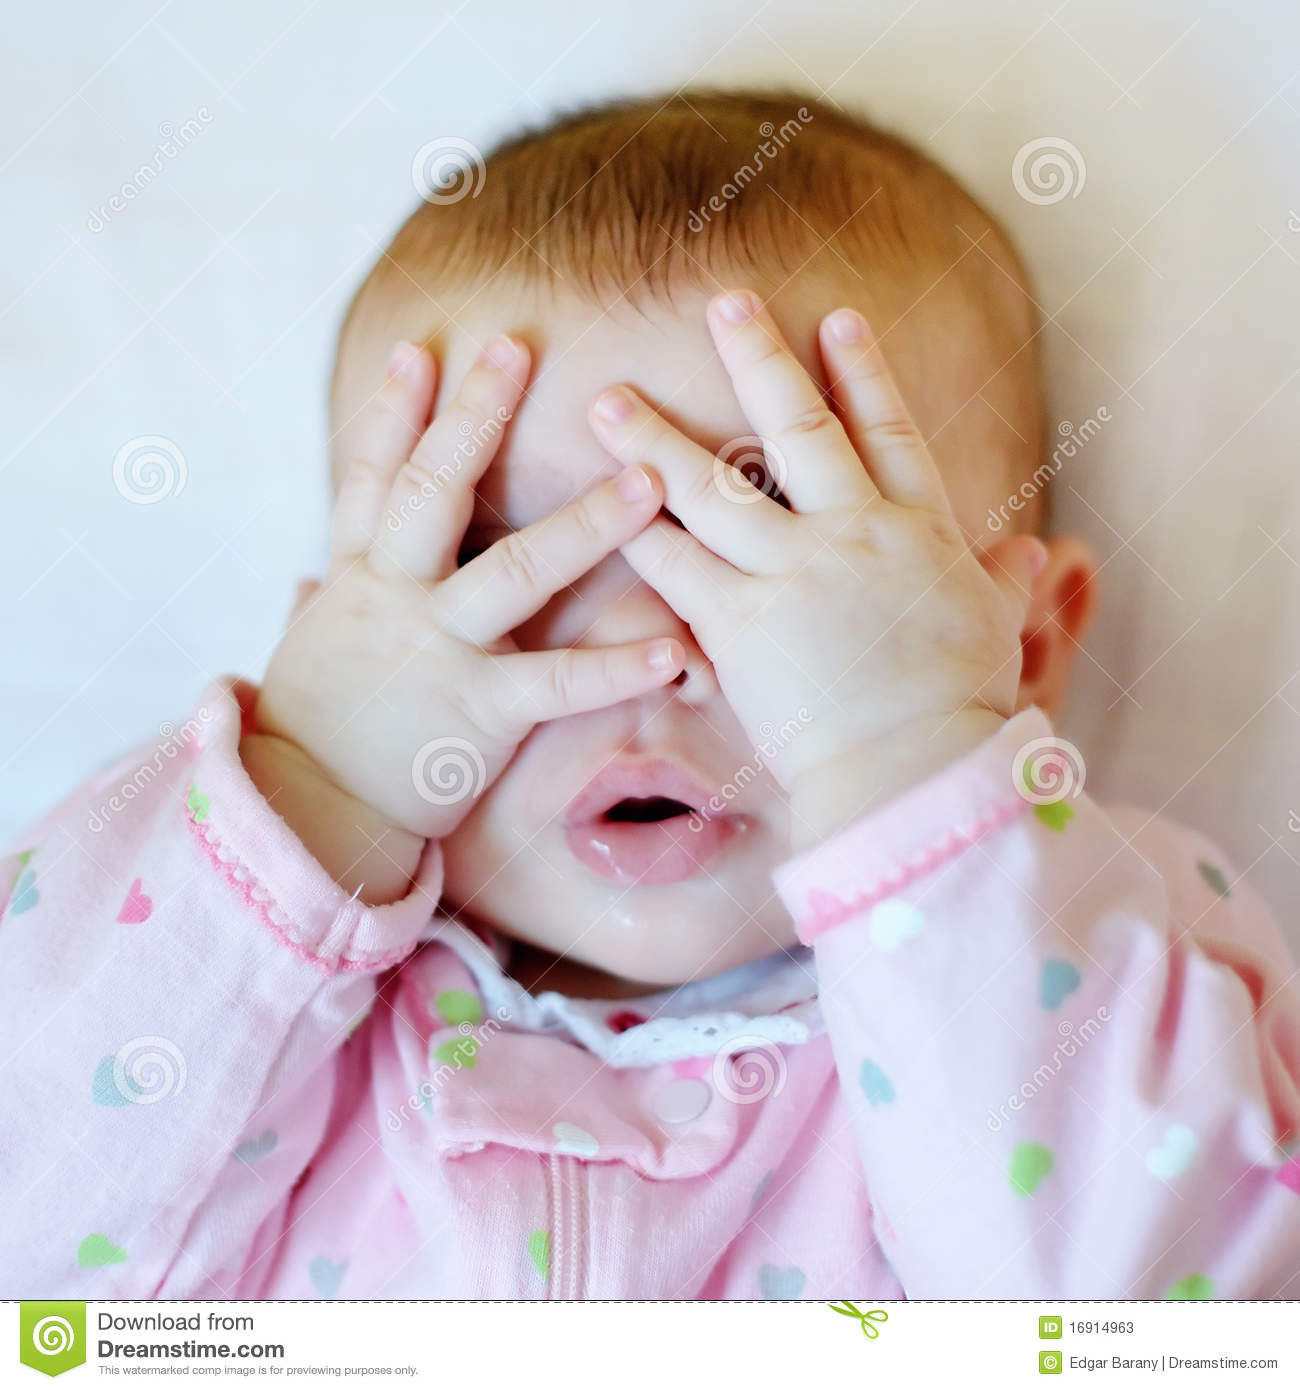 Baby Putting Hands On Face Stock Photos   Image  16914963